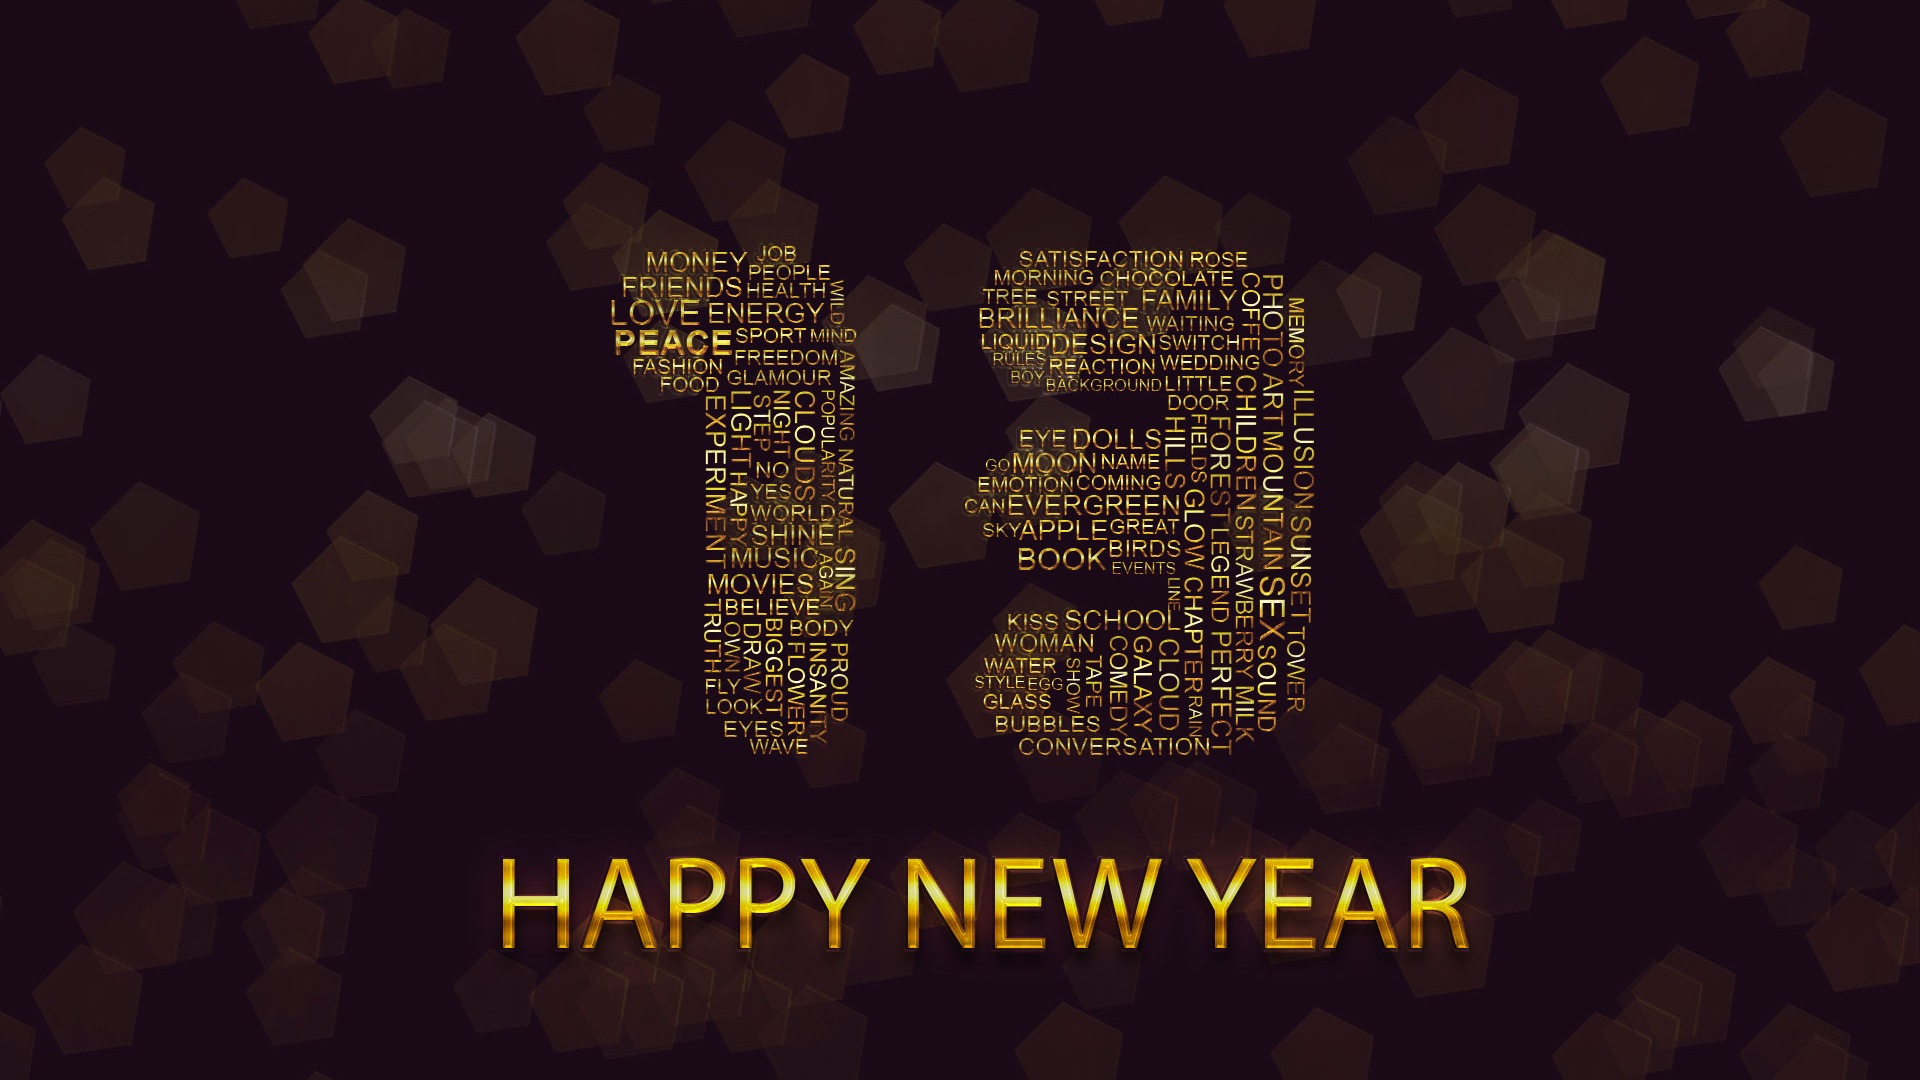 2013 Happy New Year HD wallpapers #12 - 1920x1080